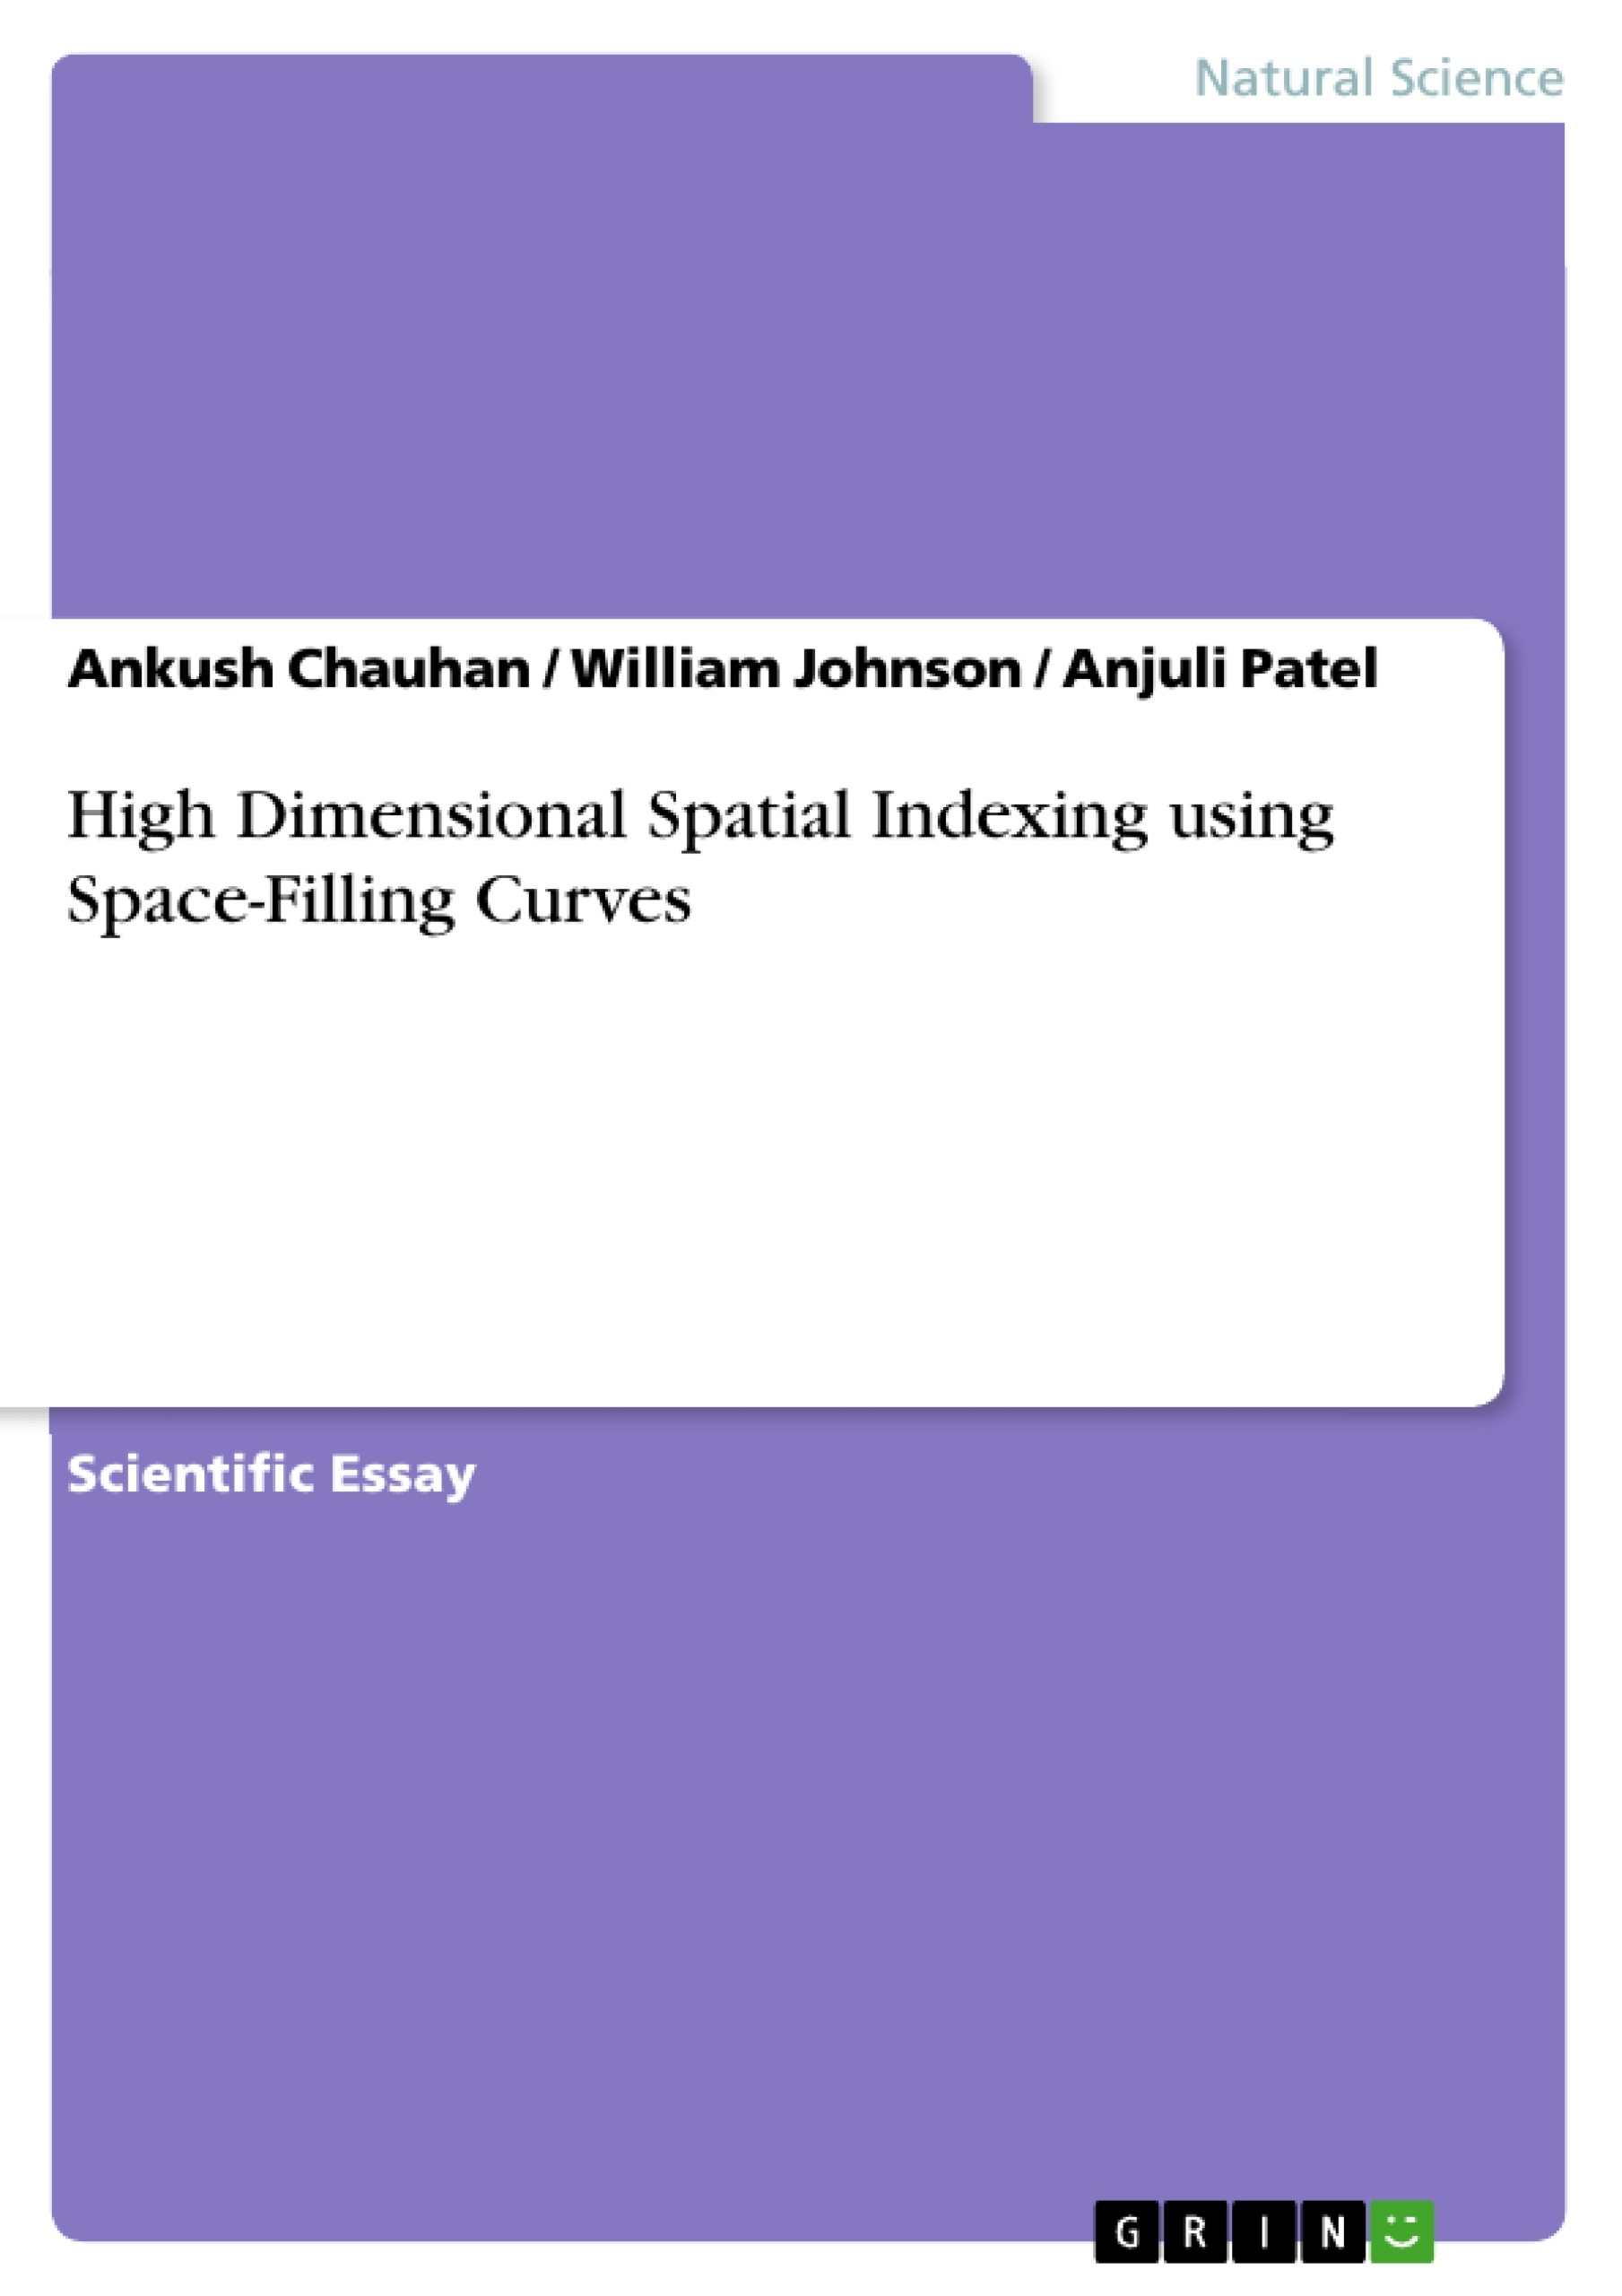 Title: High Dimensional Spatial Indexing using Space-Filling Curves